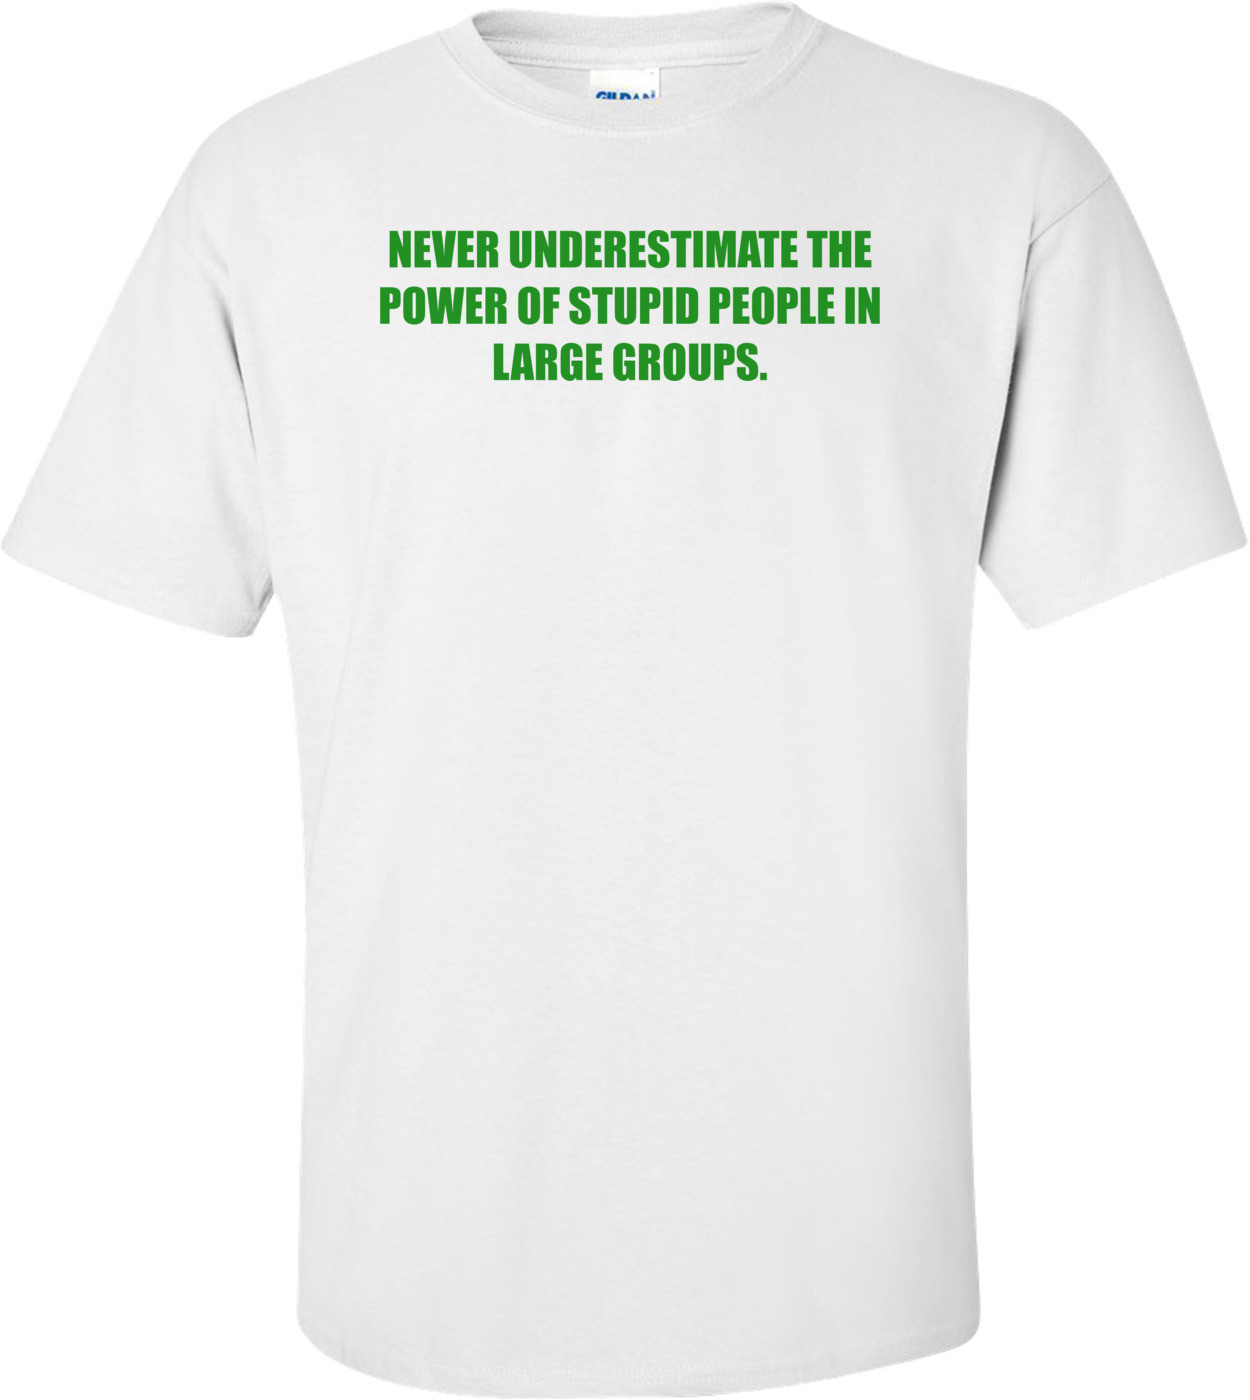 NEVER UNDERESTIMATE THE POWER OF STUPID PEOPLE IN LARGE GROUPS. Shirt